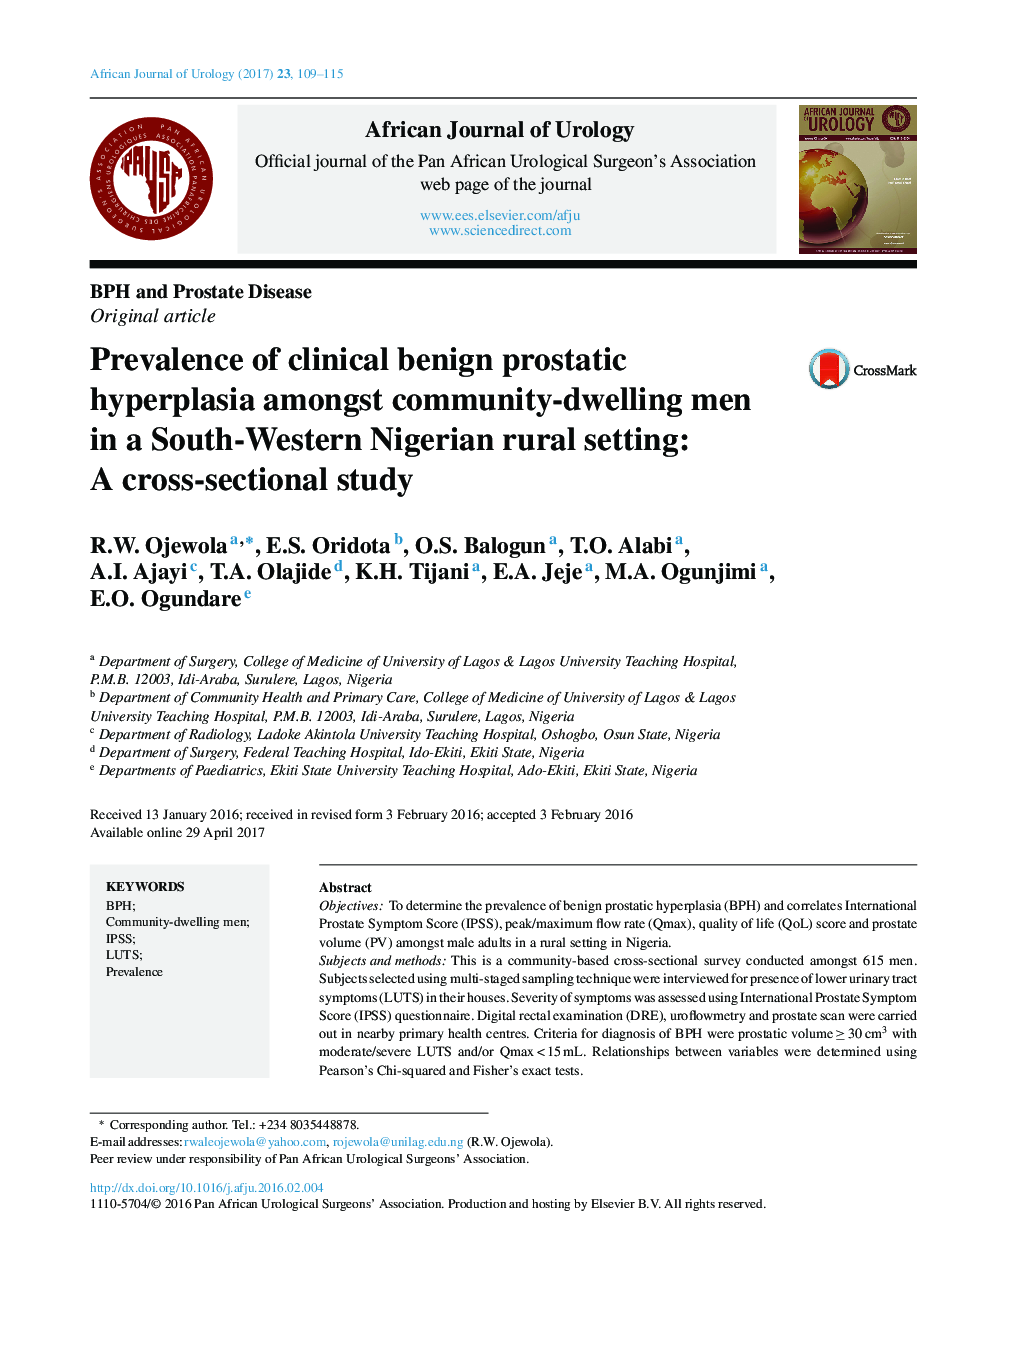 BPH and Prostate DiseaseOriginal articlePrevalence of clinical benign prostatic hyperplasia amongst community-dwelling men in a South-Western Nigerian rural setting: A cross-sectional study